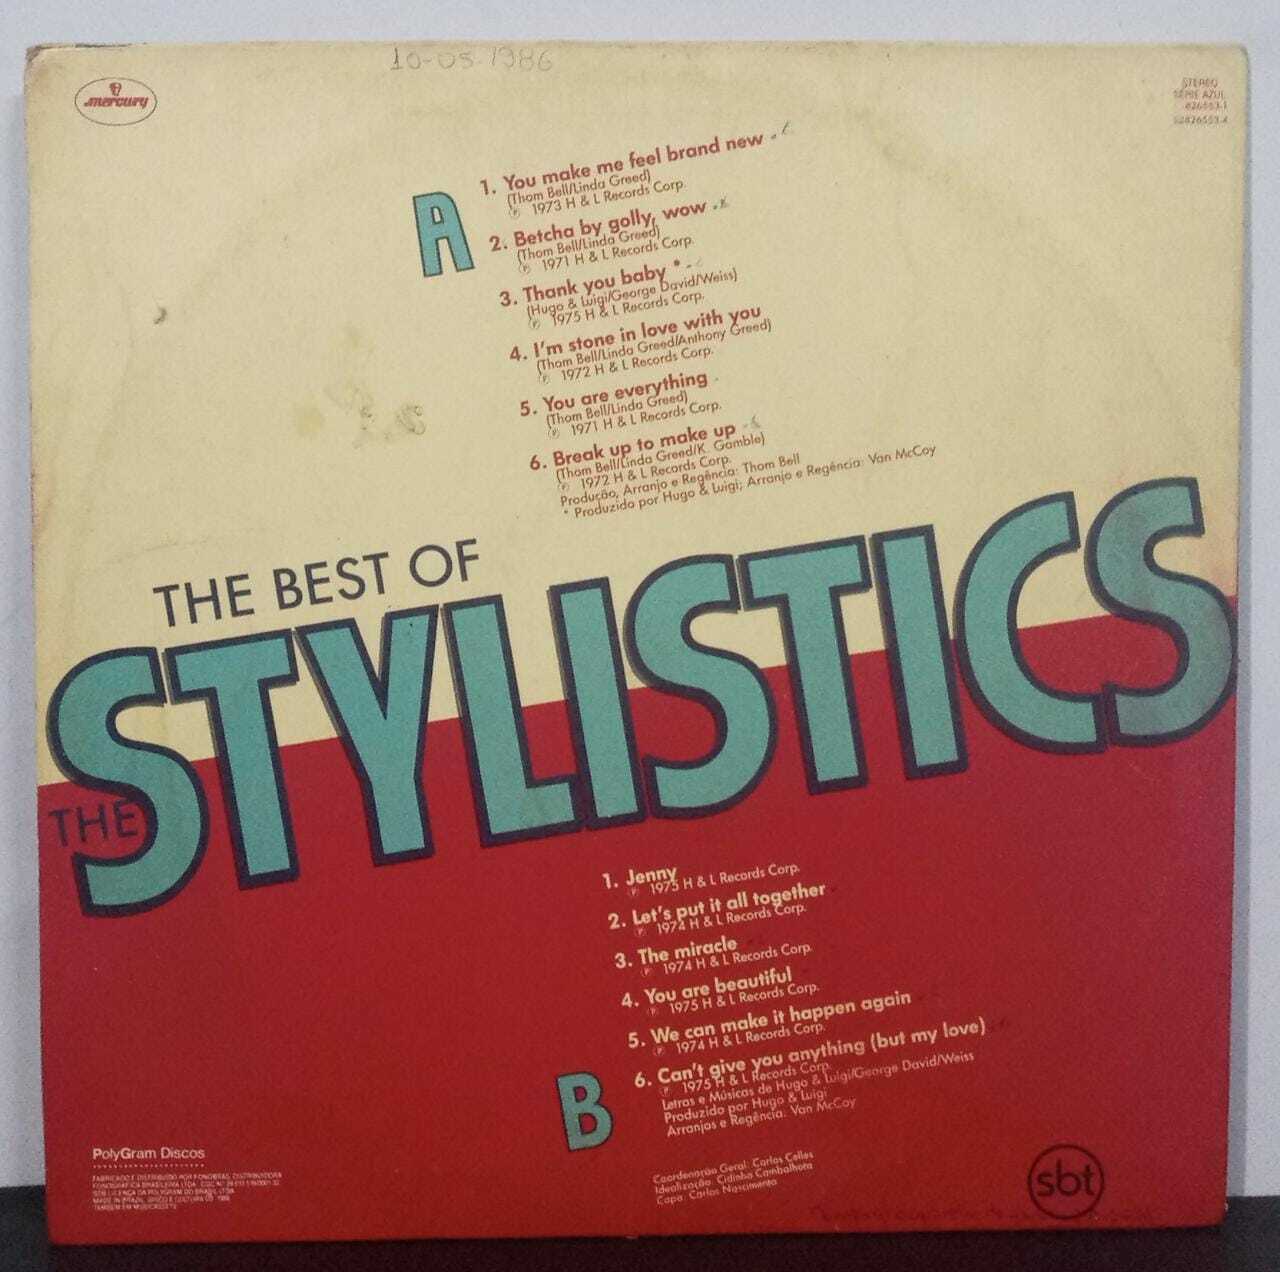 Vinil - Stylistics the - The Best of